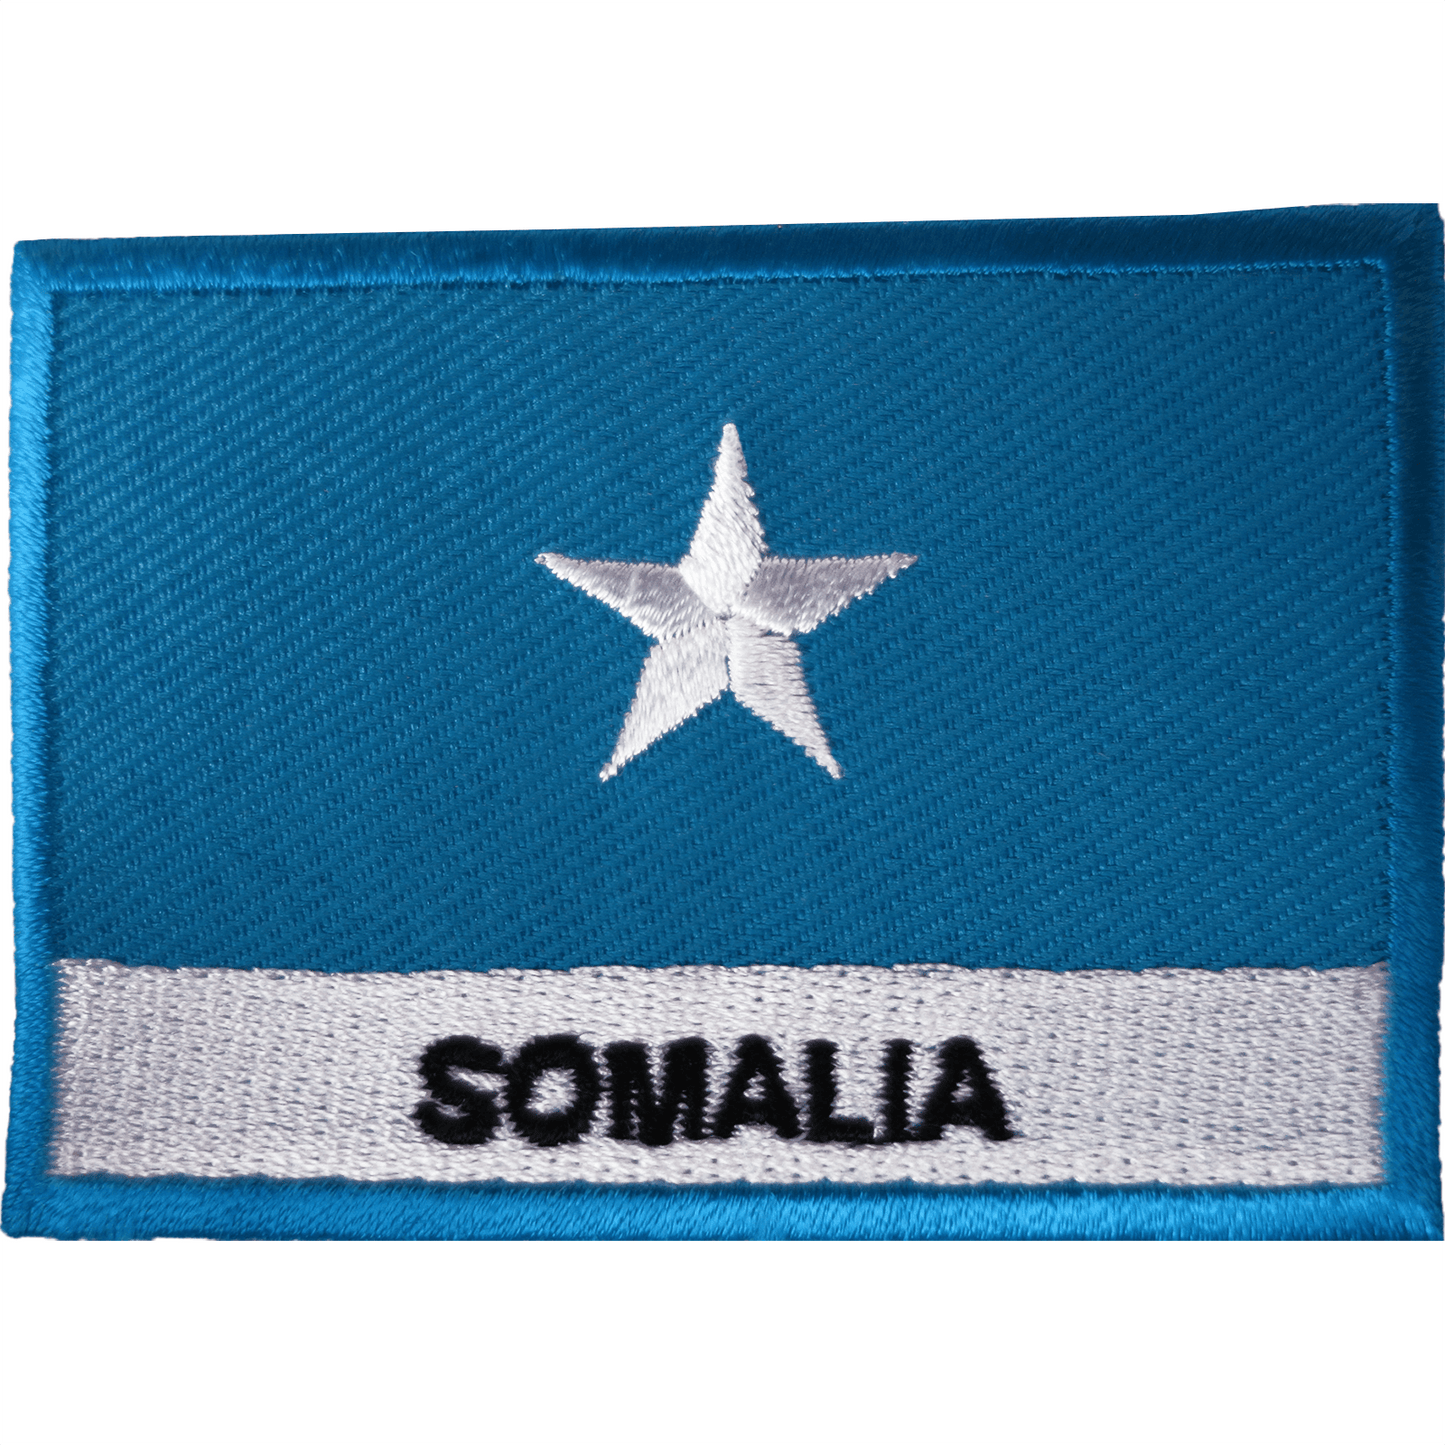 Somalia Flag Patch Iron Sew On Cloth Somali Africa Embroidered Embroidery Badge